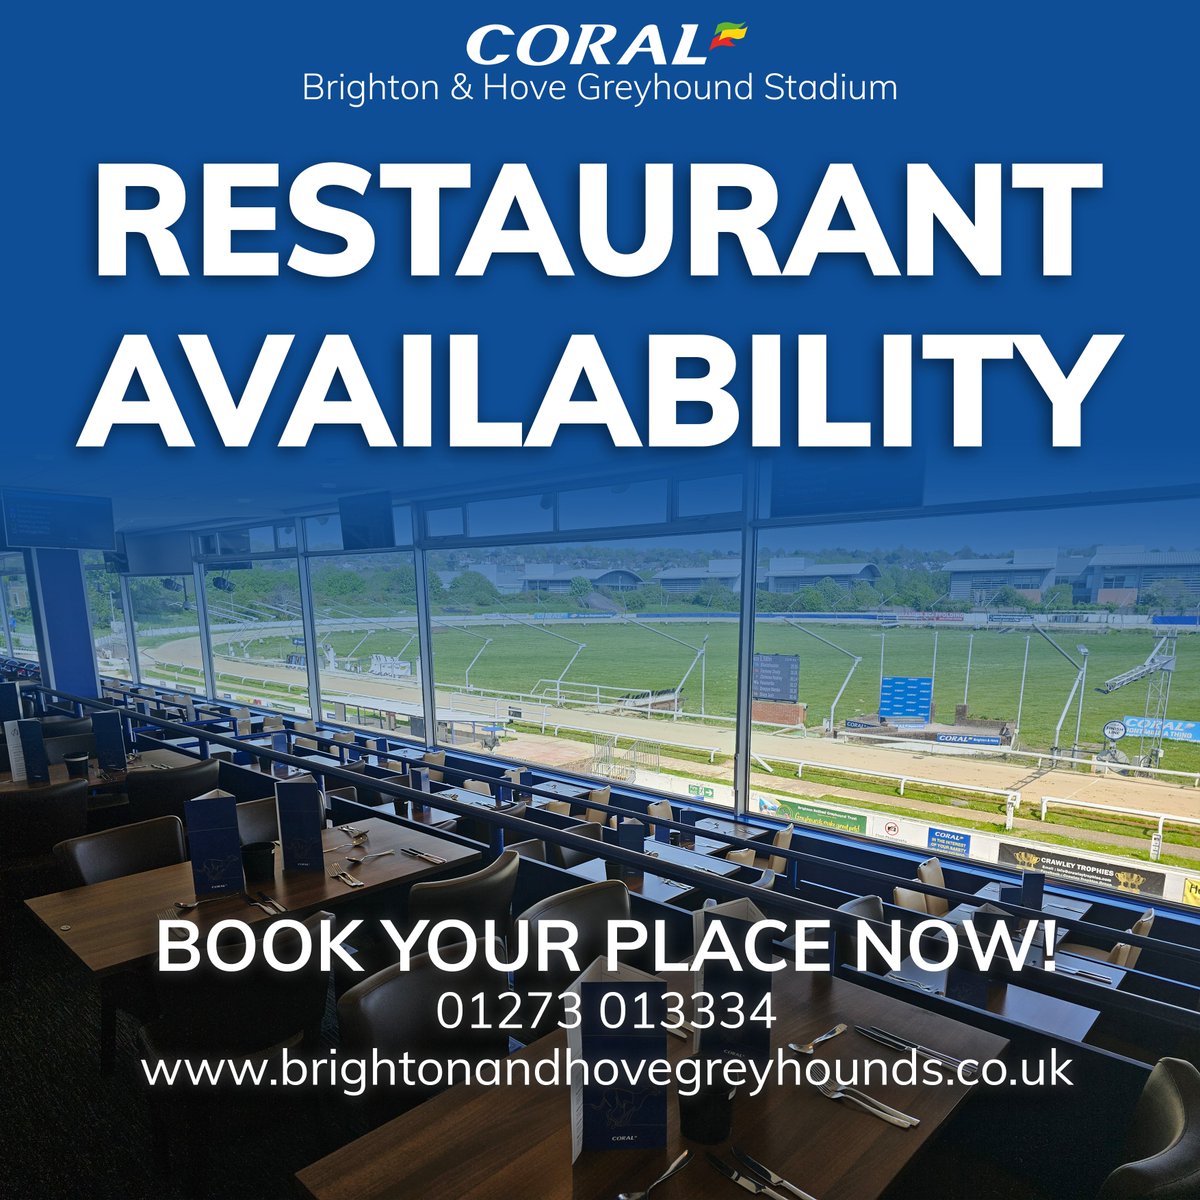 Looking for somewhere to go this weekend? Join us in our restaurant on Saturday or Sunday! 🍽️ Book now! 📞01273 013334 📩hove.stadium@coral.co.uk 💻brightonandhovegreyhounds.co.uk/events